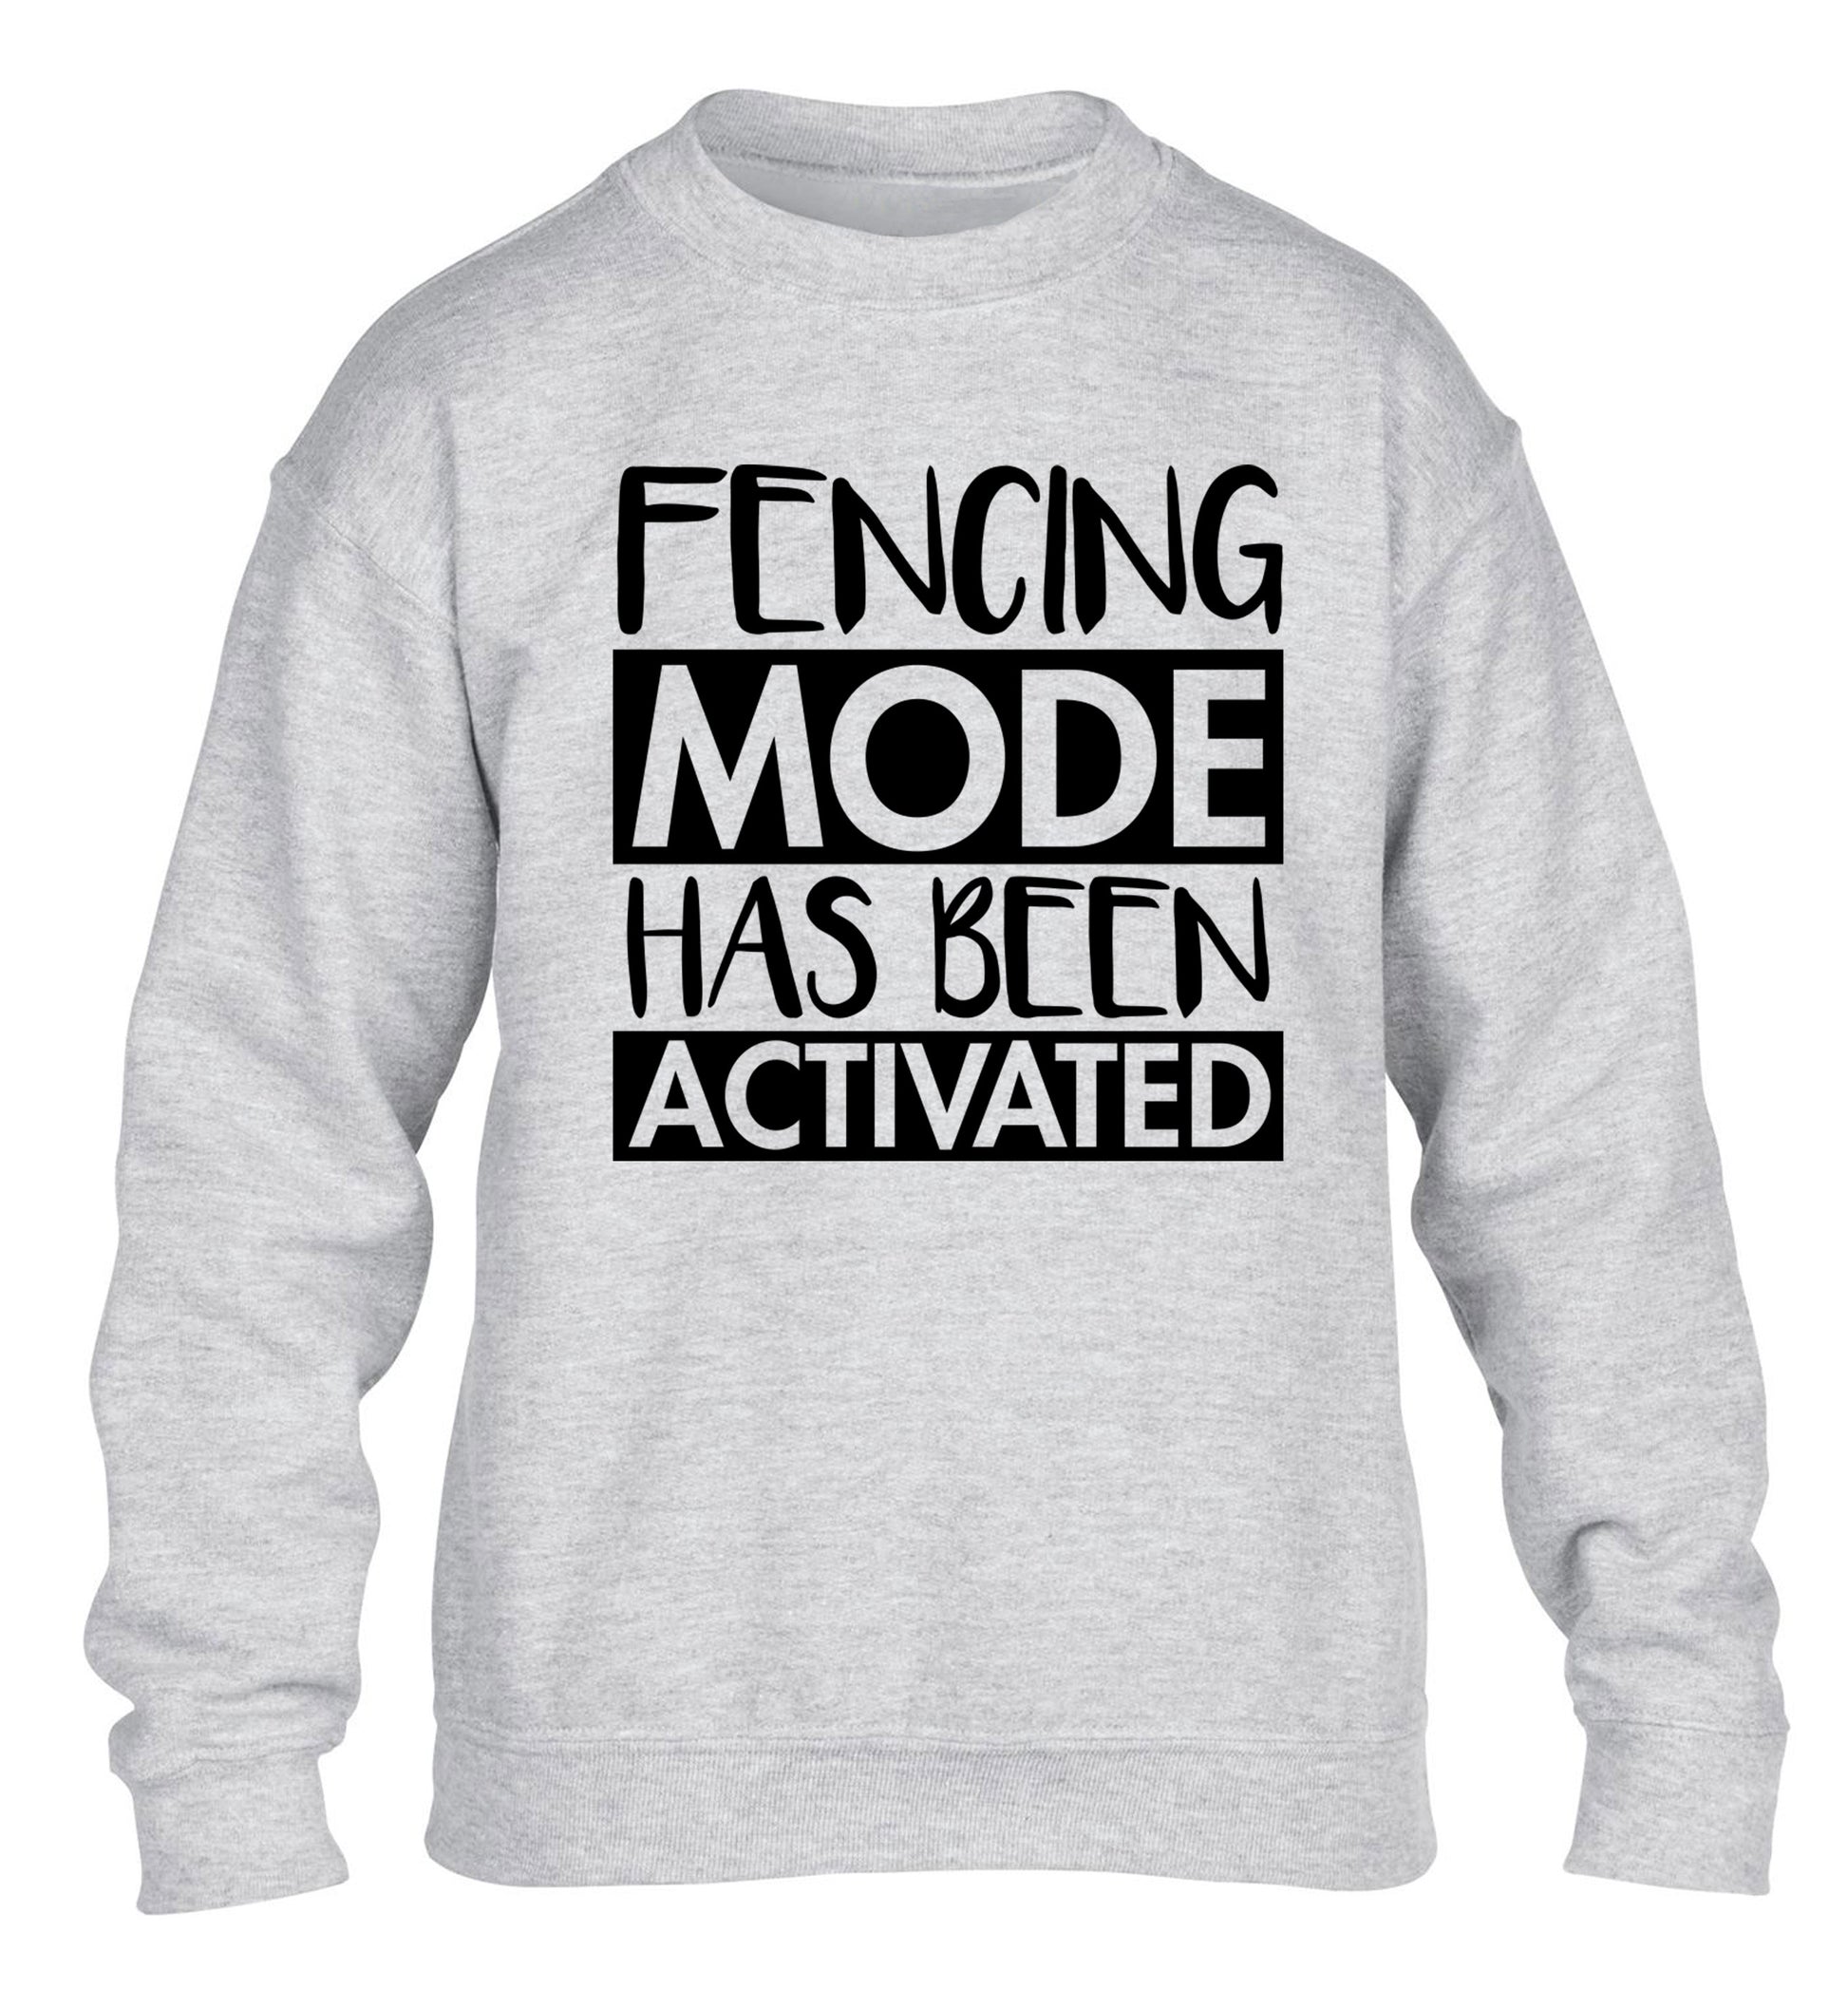 Fencing mode activated children's grey sweater 12-14 Years